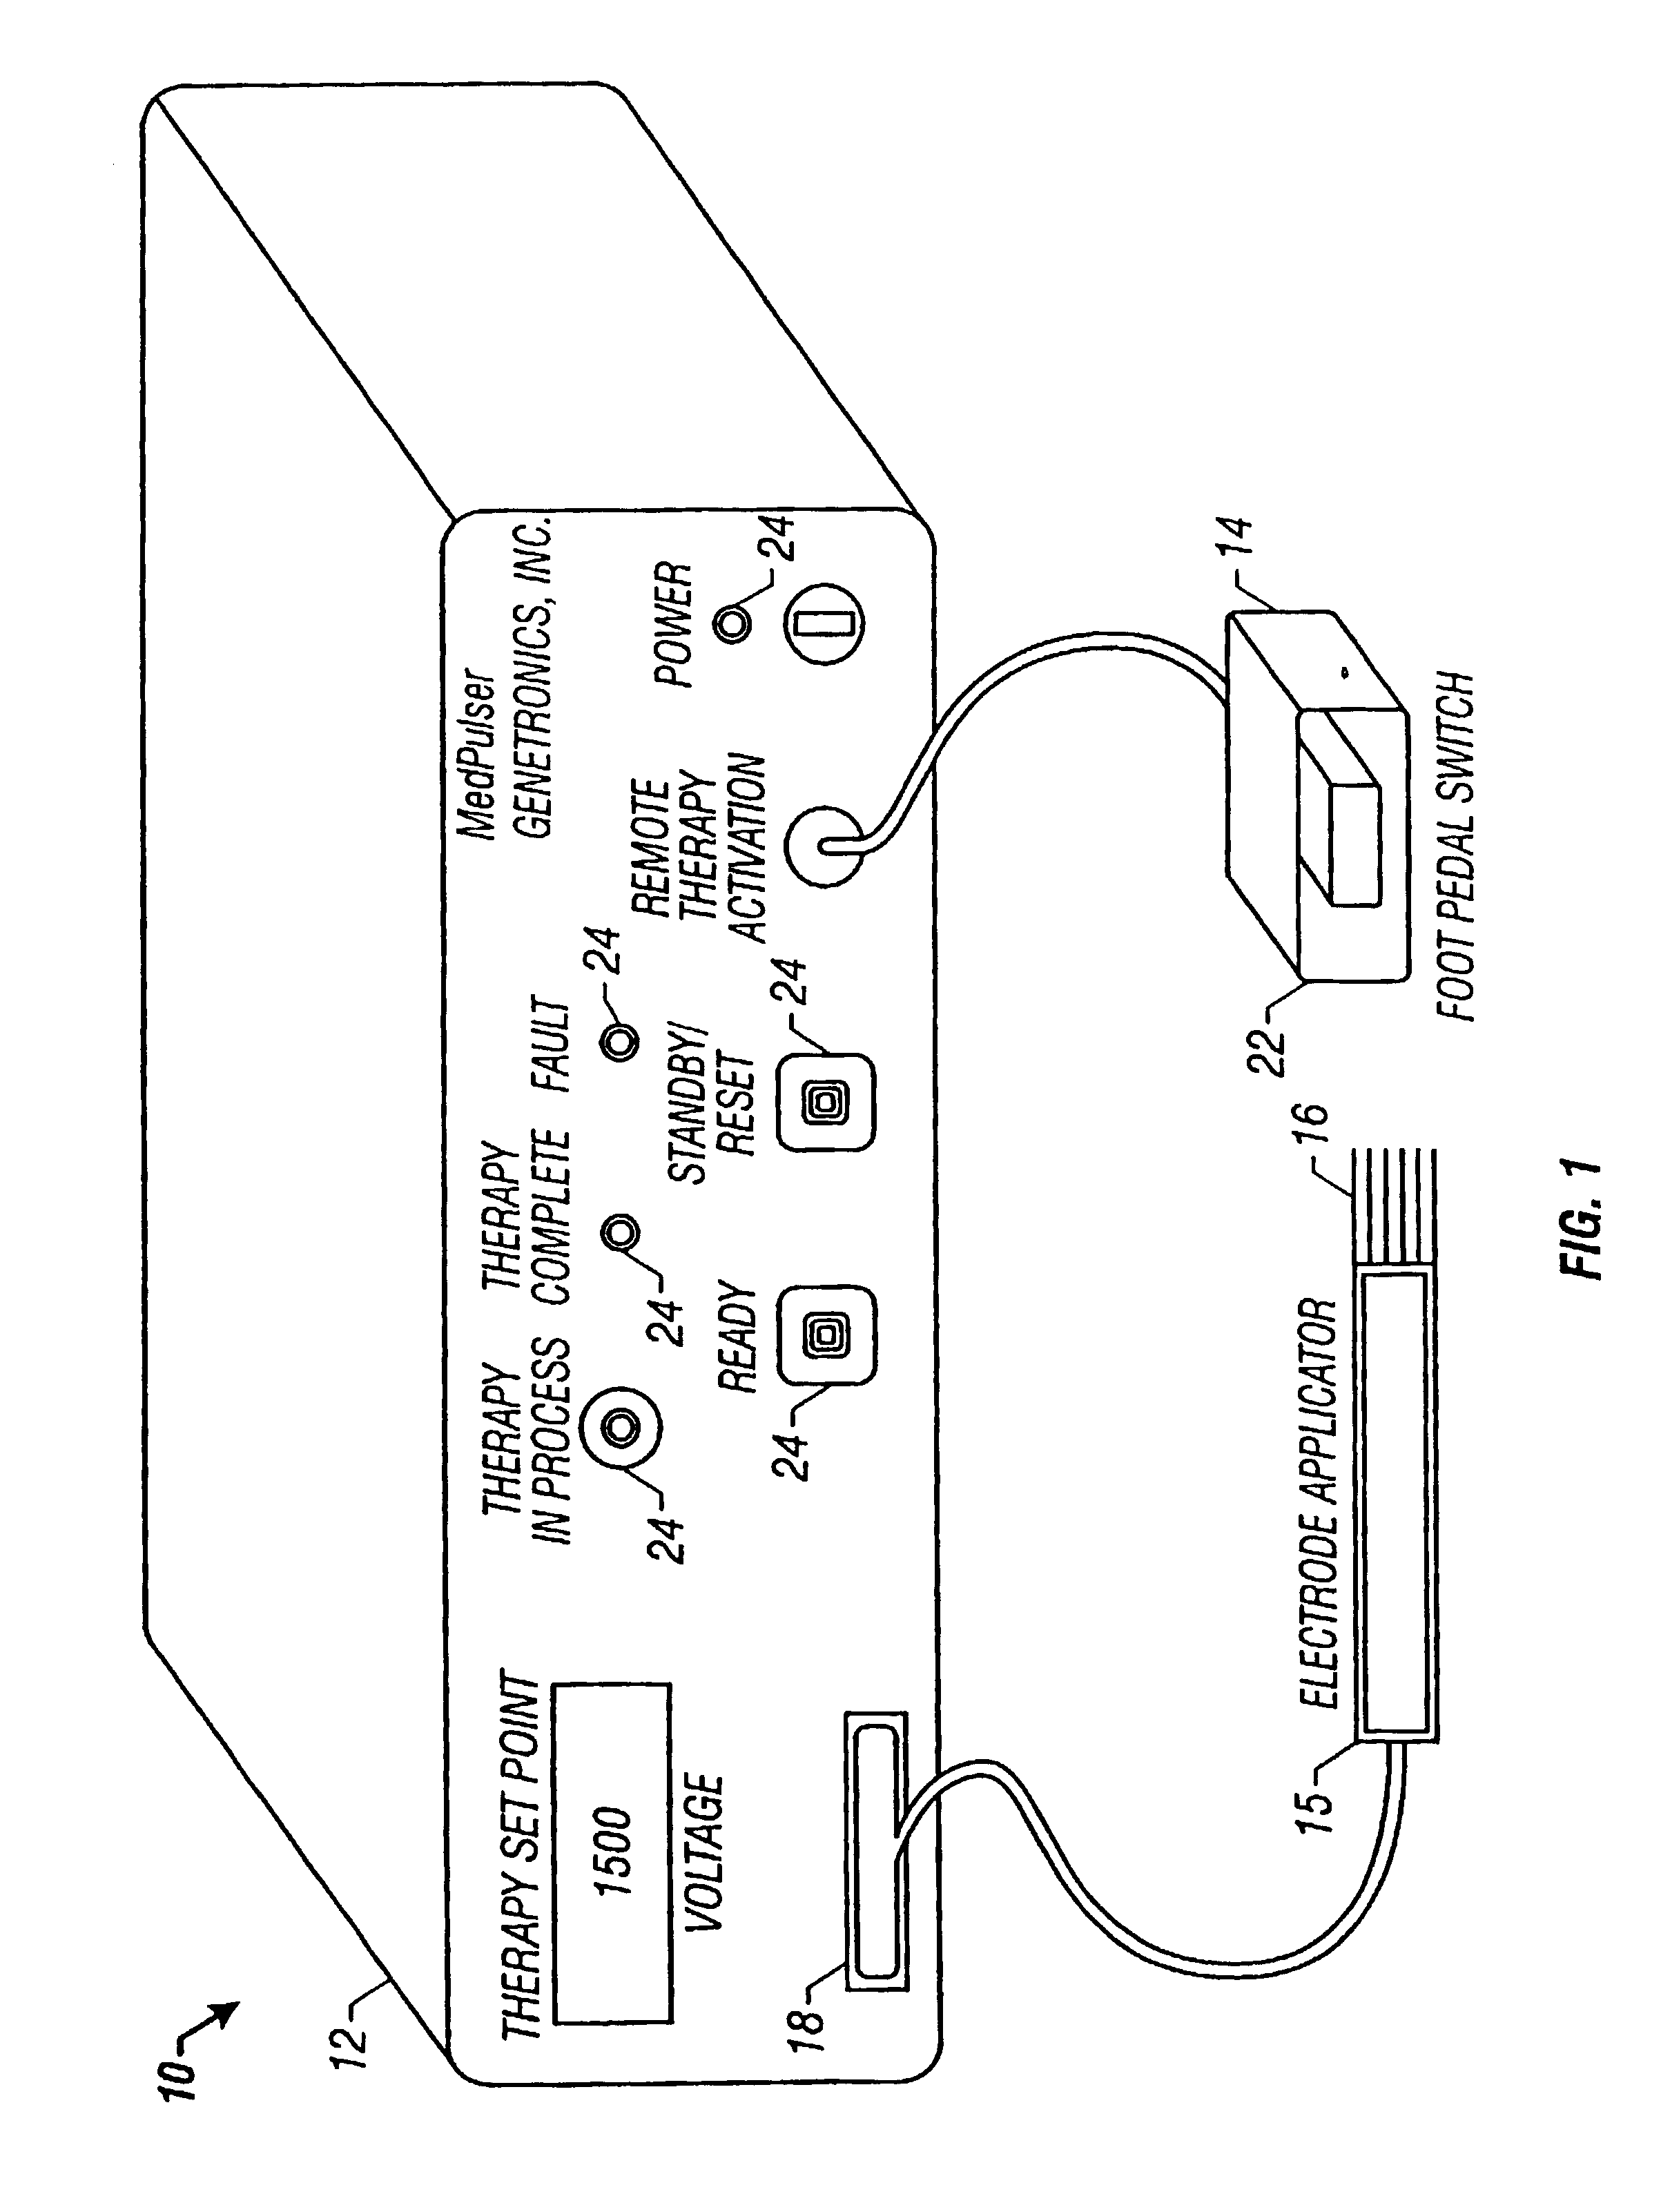 Method and apparatus for reducing electroporation-mediated muscle reaction and pain response